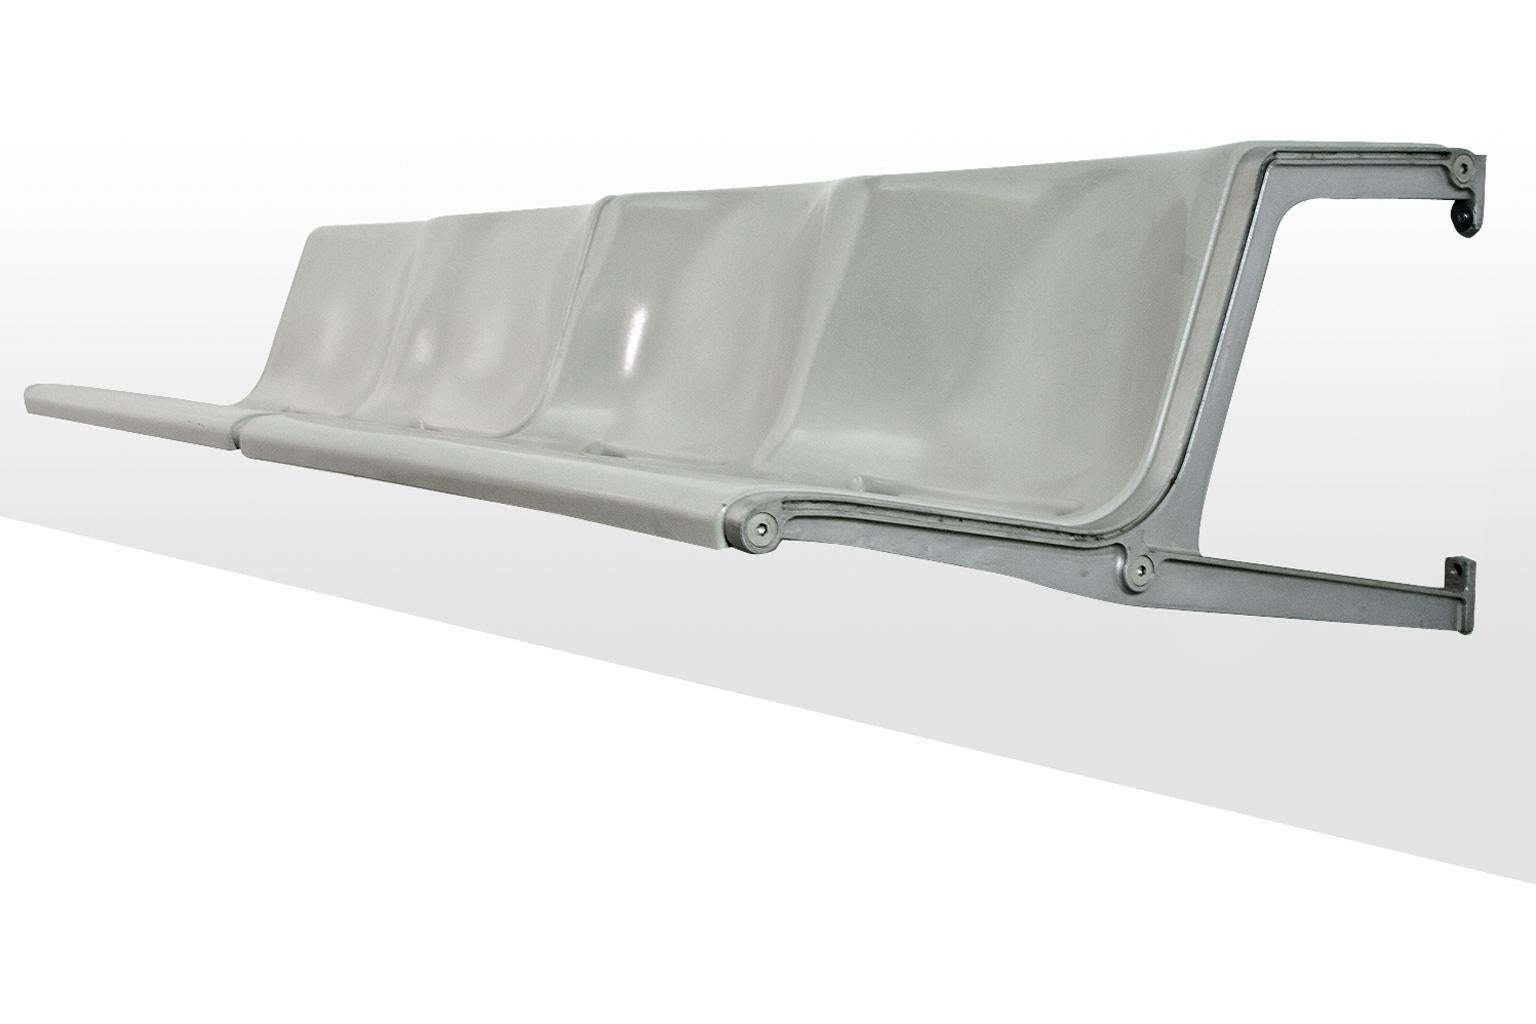 Friso Kramer designed this industrial bench in 1967 and the version with the casted aluminium T-legs became one of Wilkhahn’s most iconic products for public spaces. This Mid-Century Modern listed item, with the cast aluminium wall uprights, is less